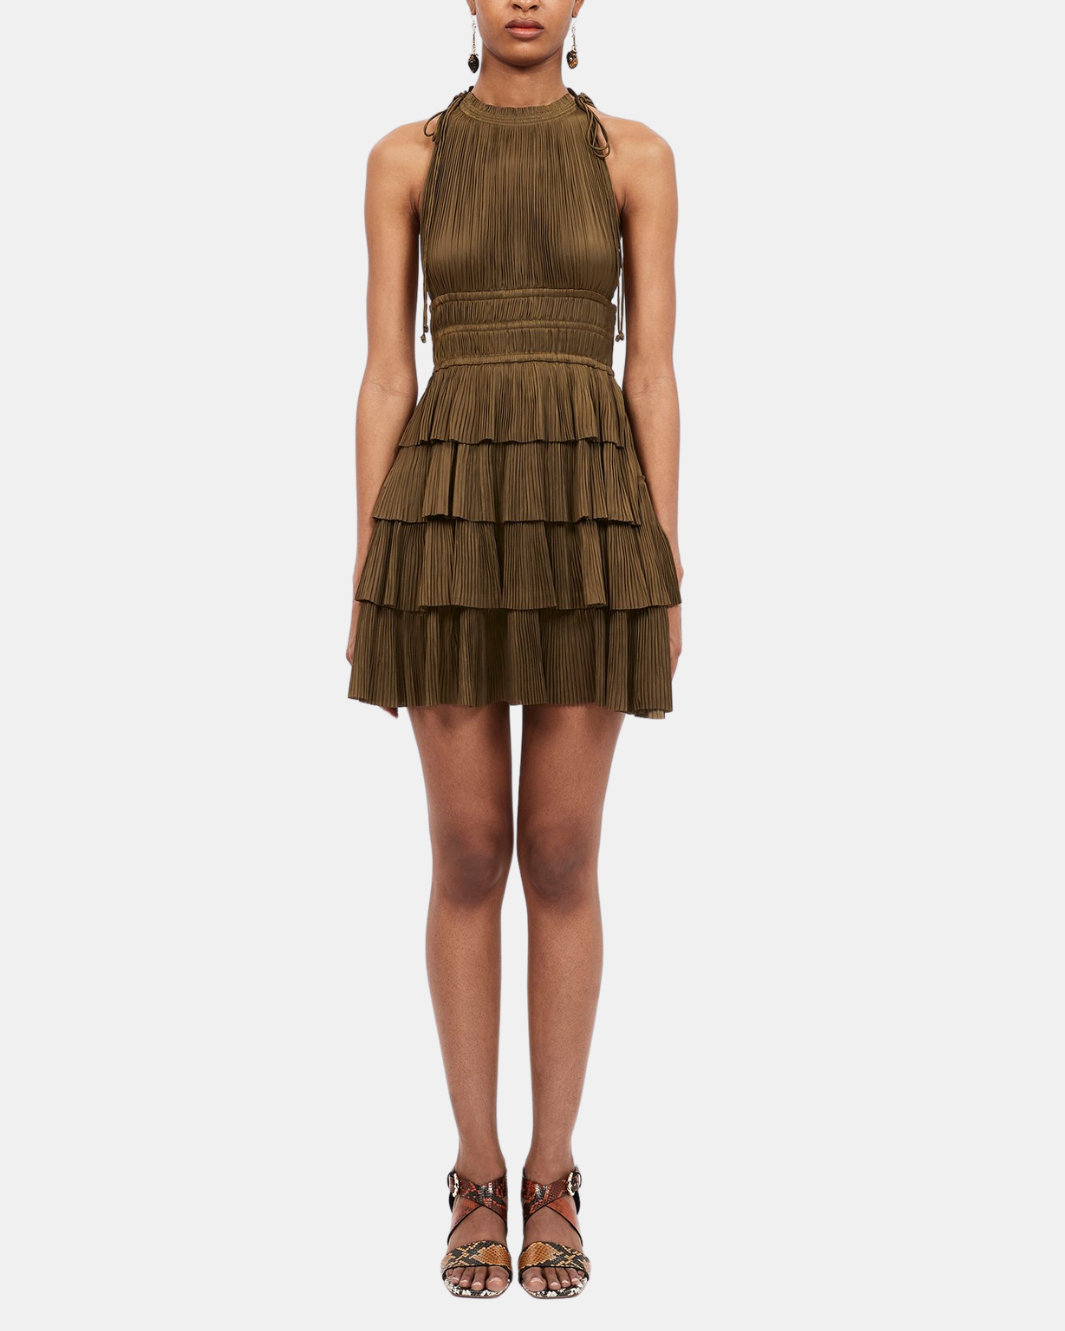 CECILY DRESS IN OLIVE - Romi Boutique